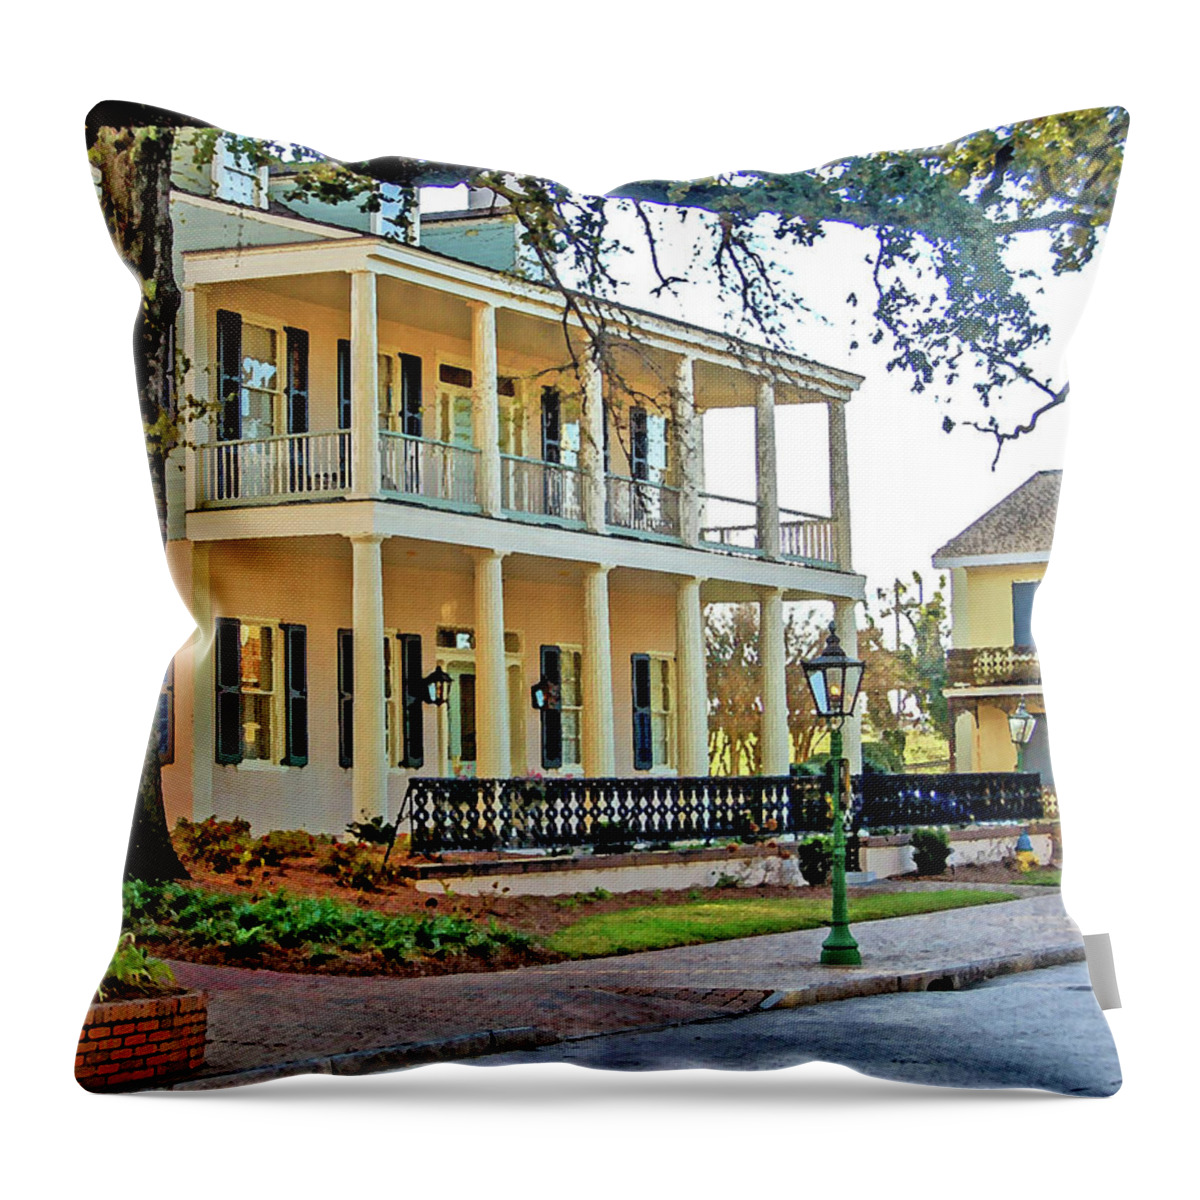 Mobile Throw Pillow featuring the digital art Fort Conde Inn in Mobile Alabama by Michael Thomas